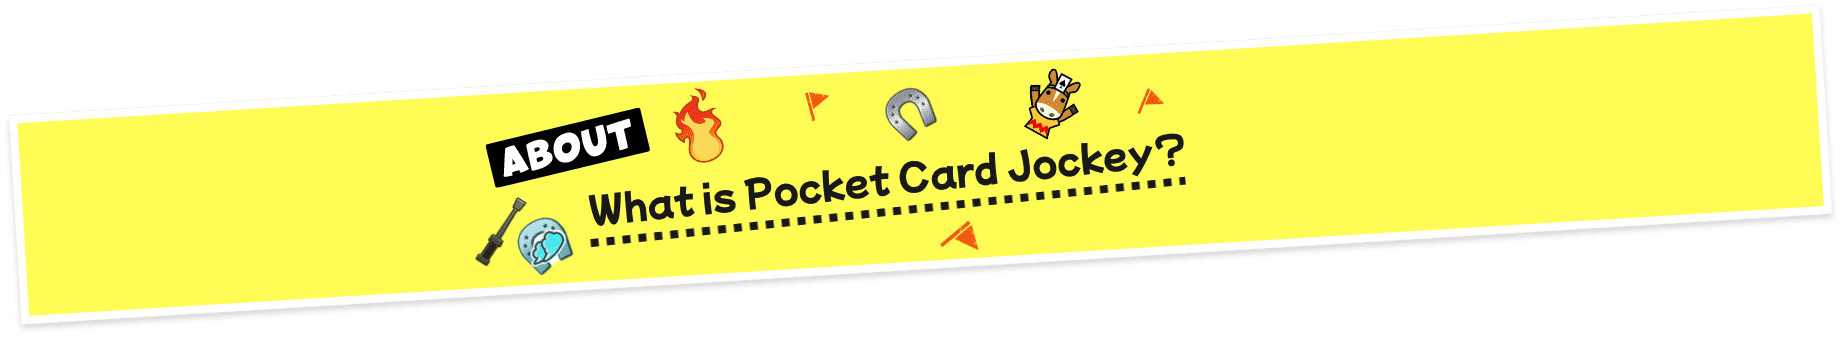 ABOUT What is Pocket Card Jockey?